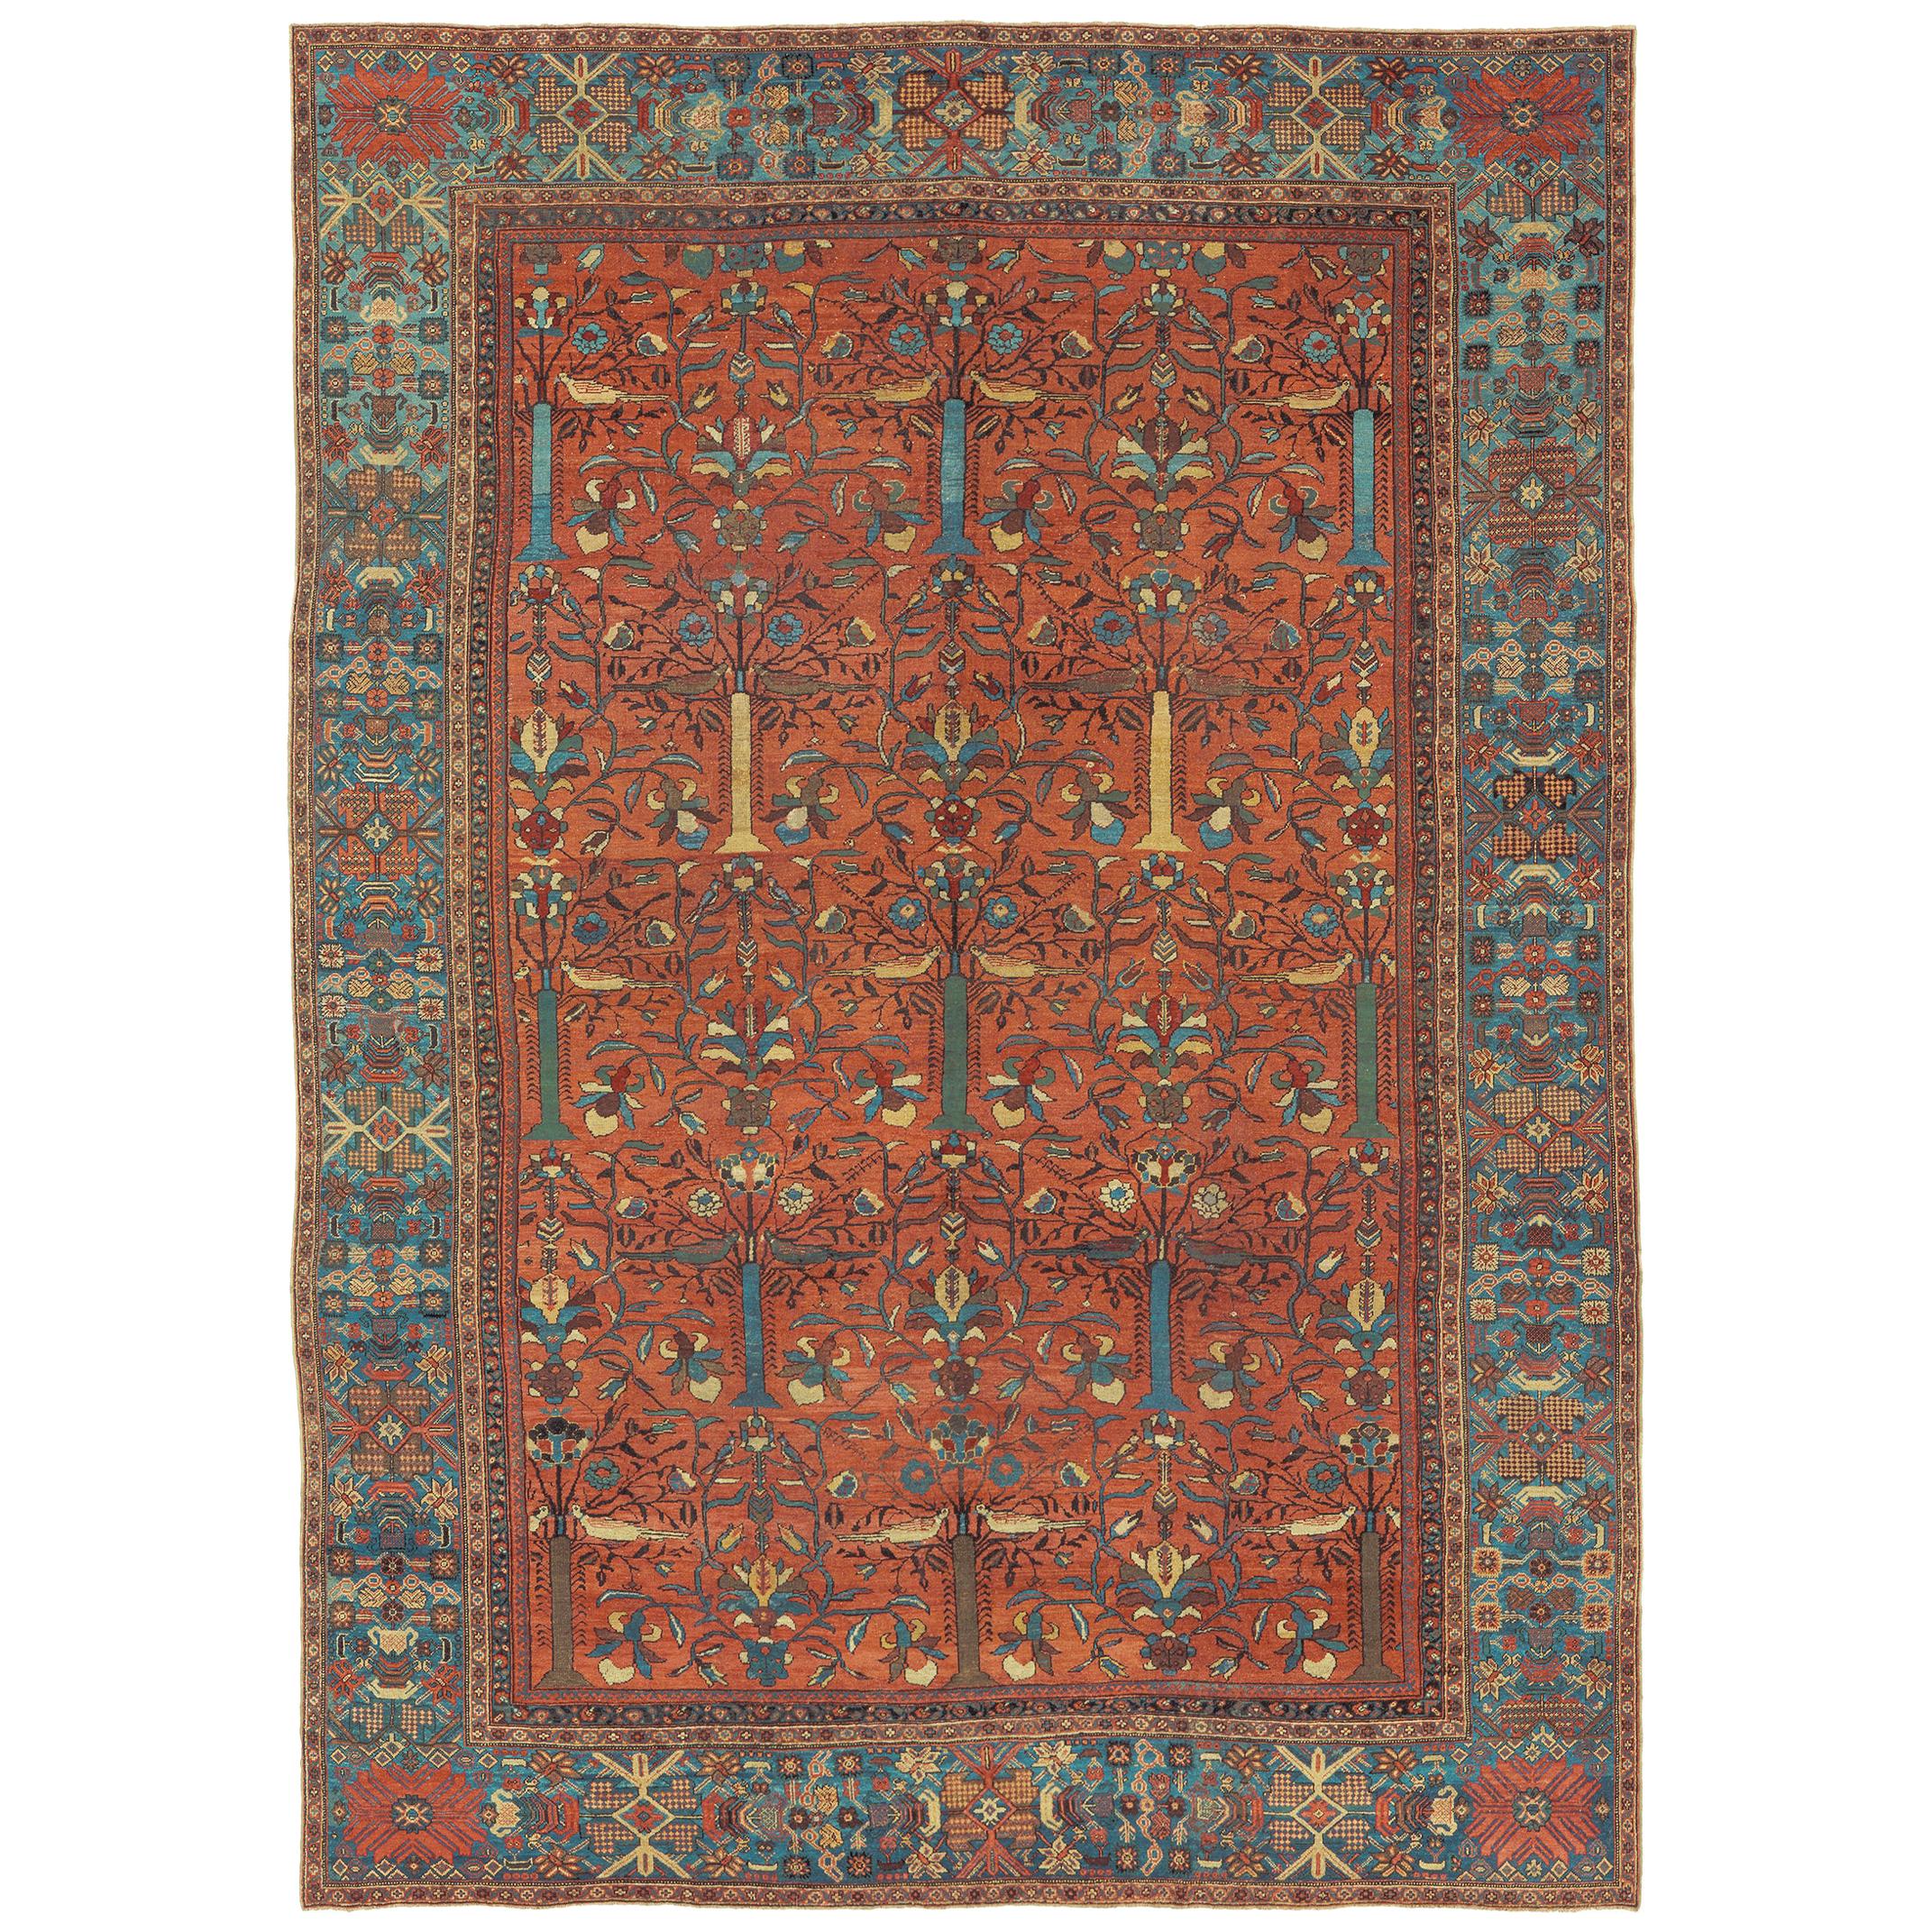 Late 19th Century Persian Sultanabad Rug